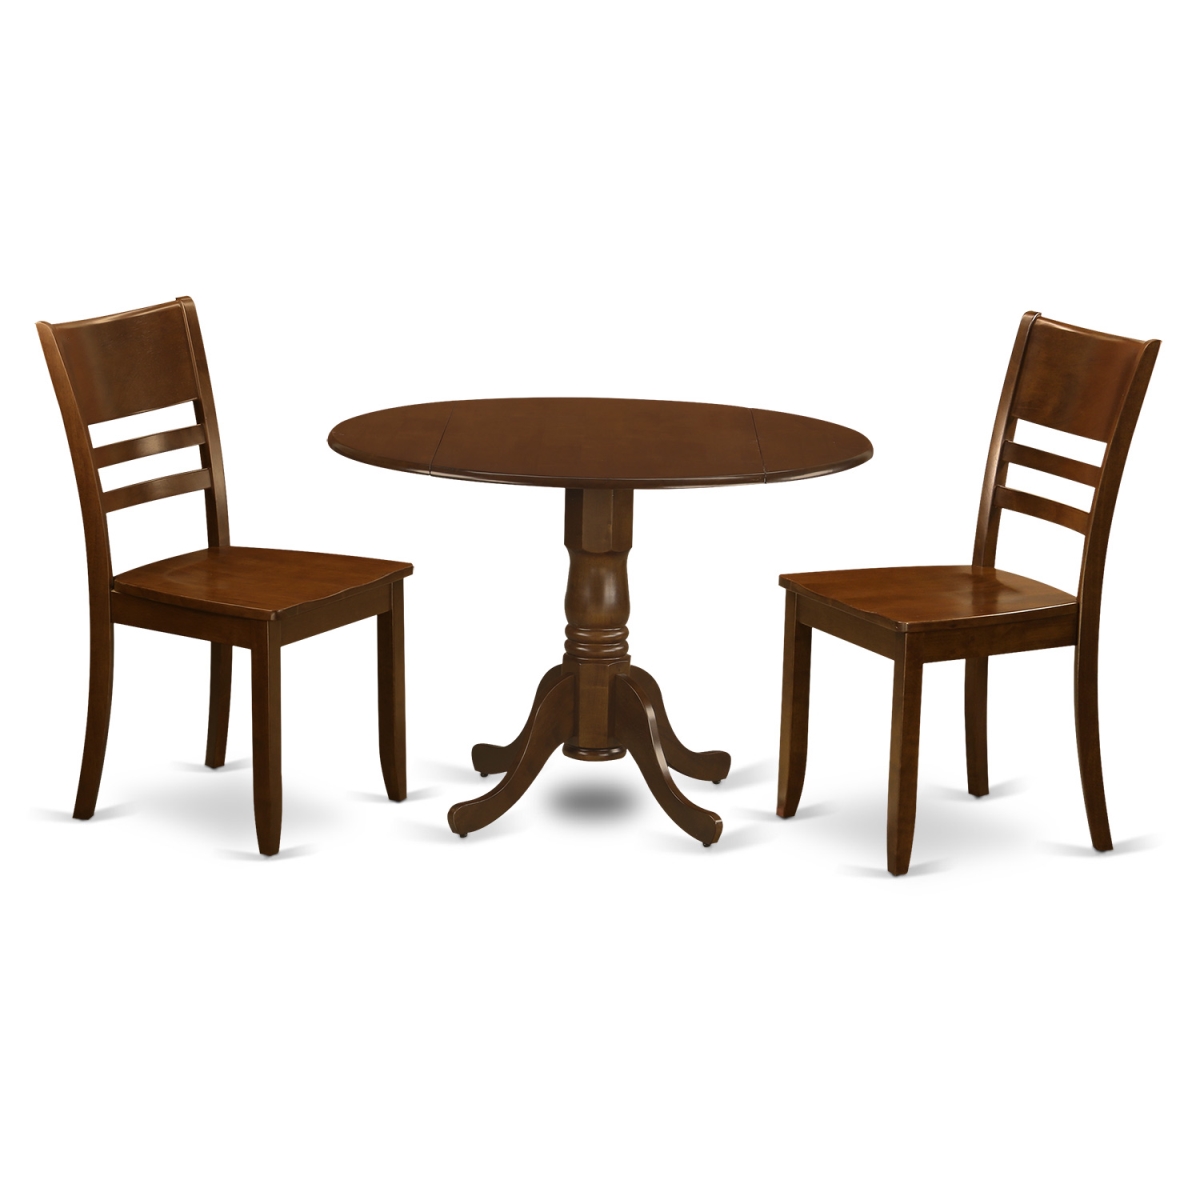 Picture of East West Furniture DLLY3-ESP-W Dublin Kitchen Table with Two Drop - Leaf & Two Leather Chairs, Espresso - 9 in. - 3 Piece